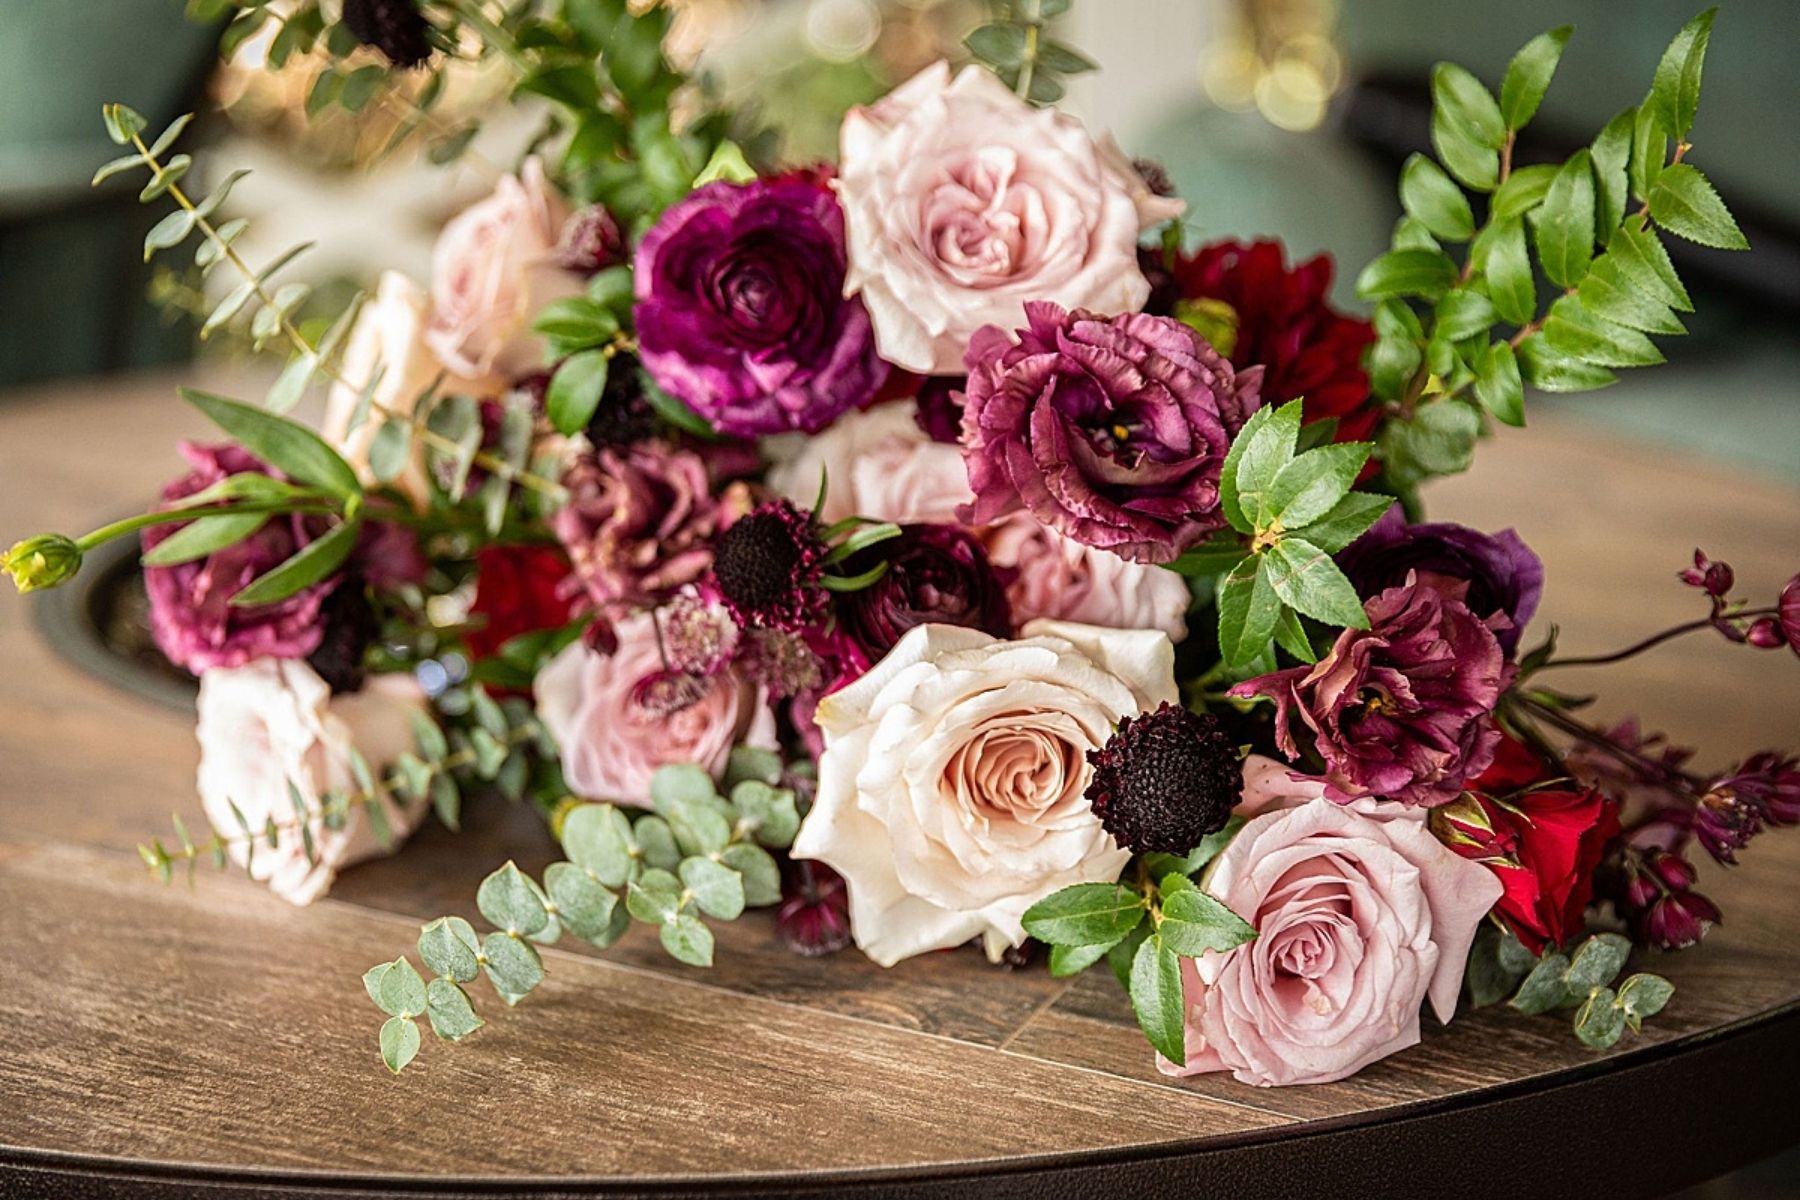 Romantic & Moody Fall Wedding Featuring Faith Roses in Genuine Pink - Thursd Floral Trend Color of the Year 2022 - Blog on Thursd